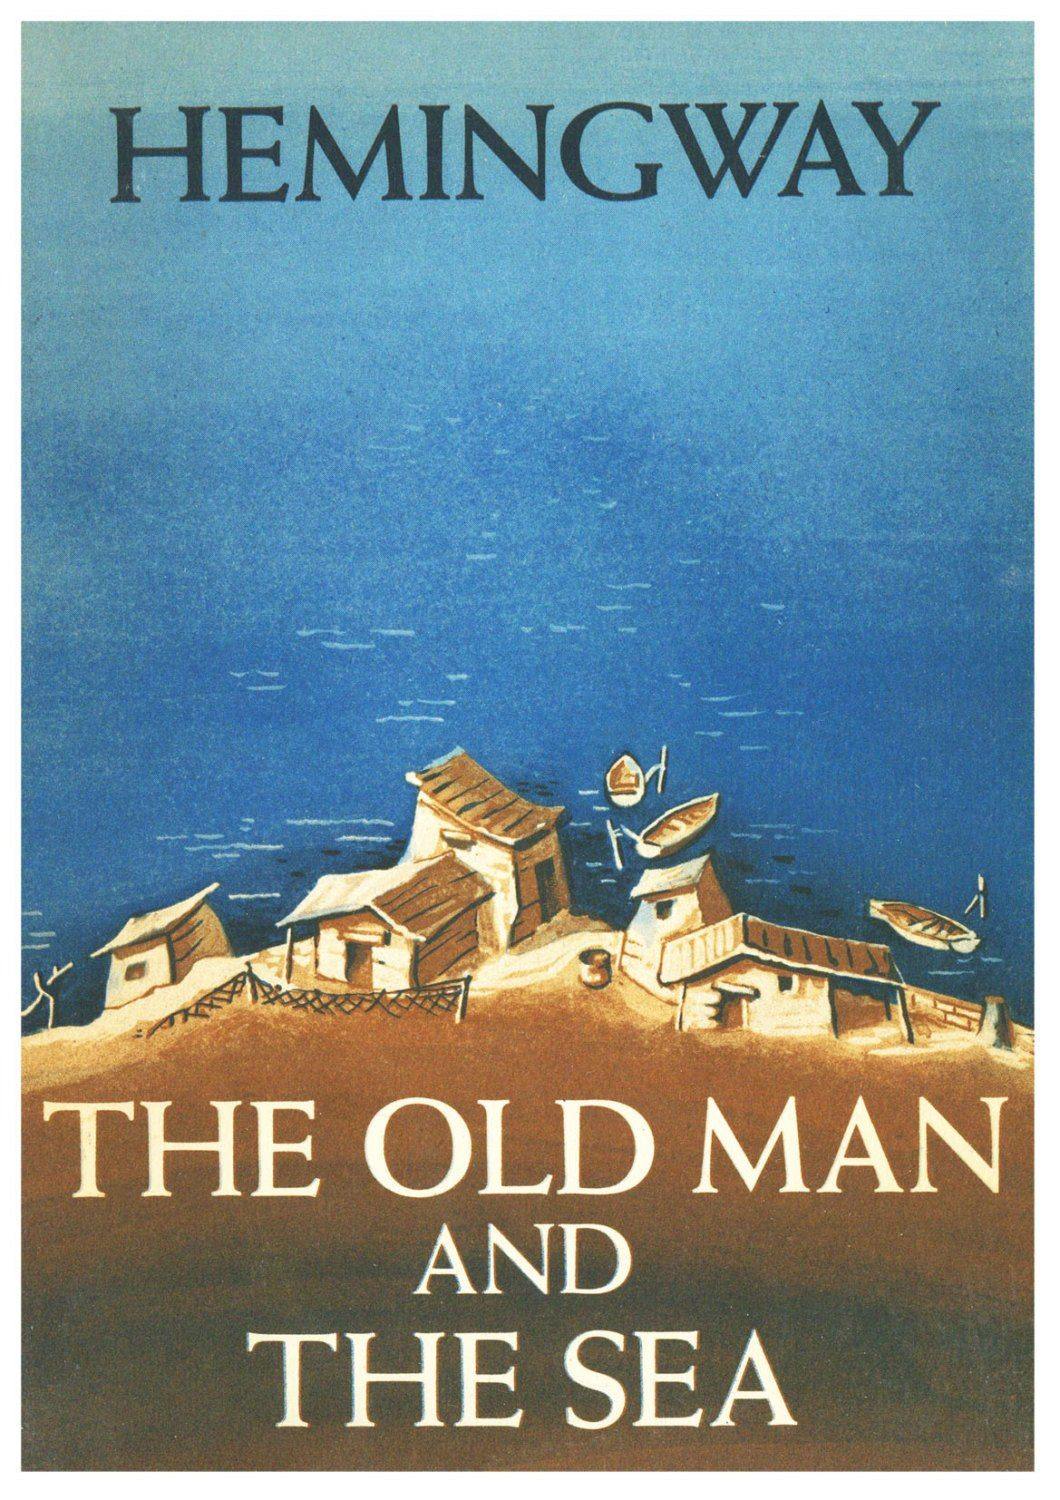 CLASSIC BOOK COVER: Vintage Old Man and the Sea Art Print - Pimlico Prints